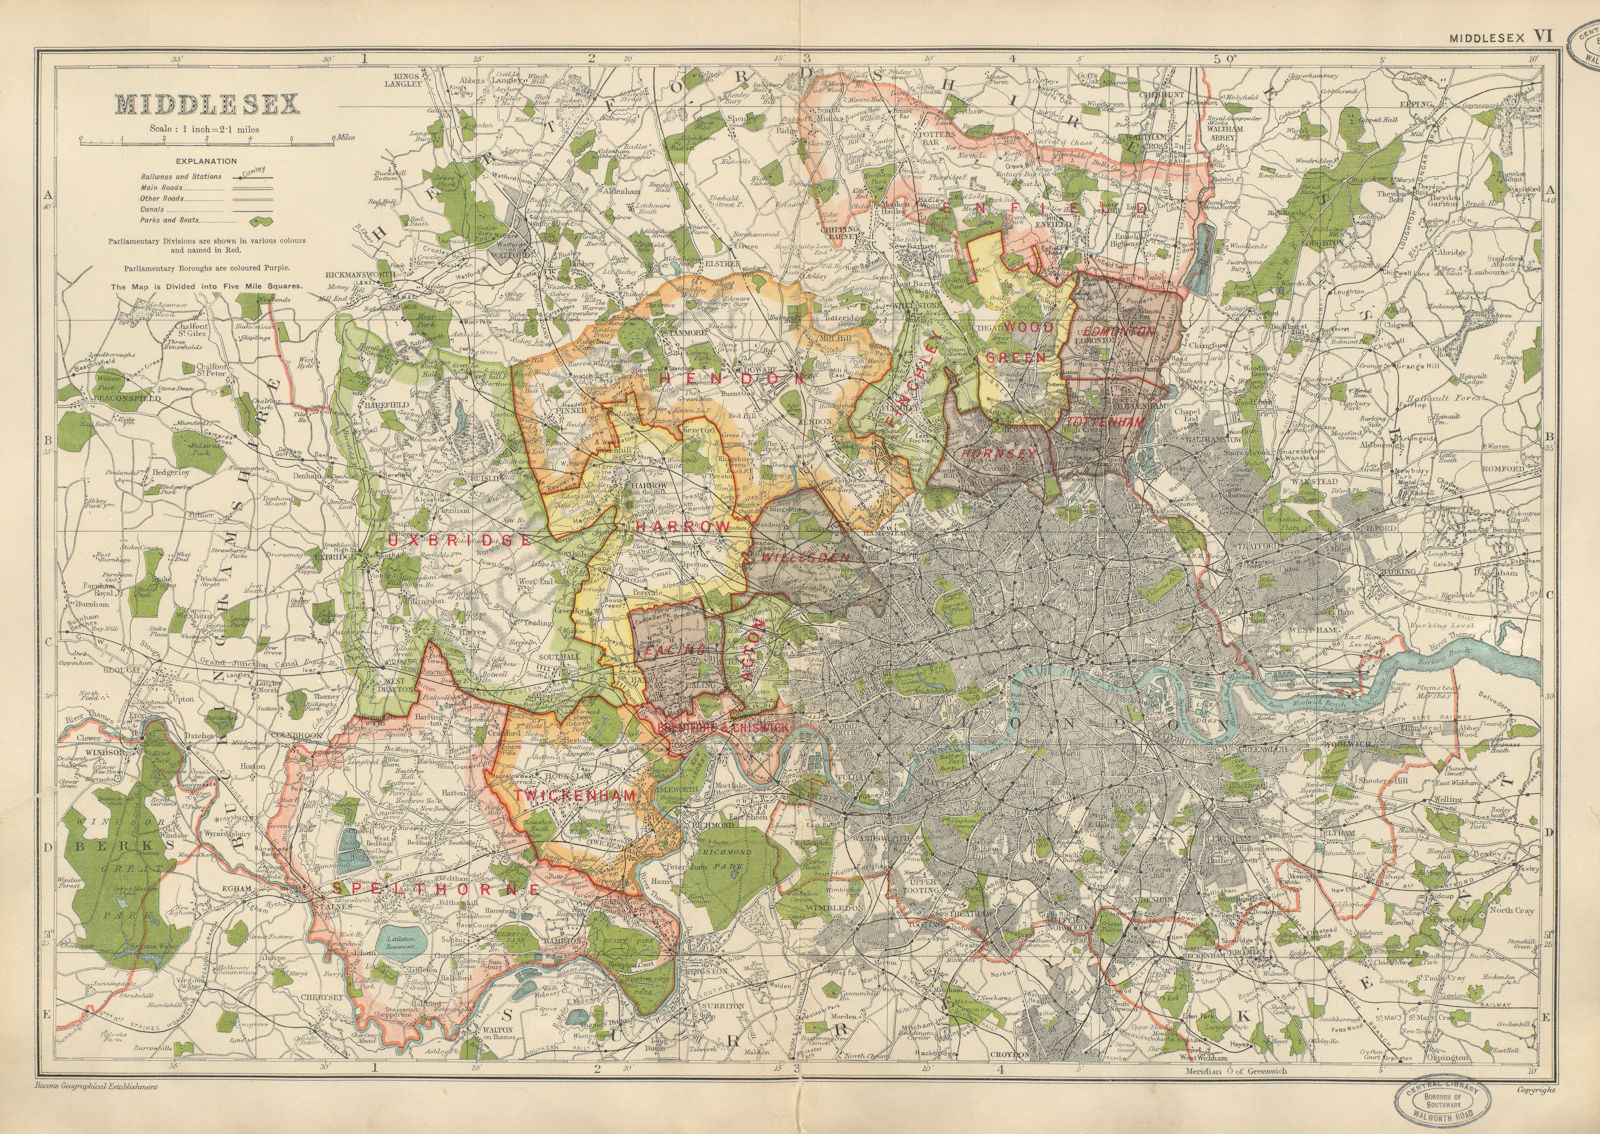 MIDDLESEX showing Parliamentary divisions parks boroughs.London.BACON 1934 map